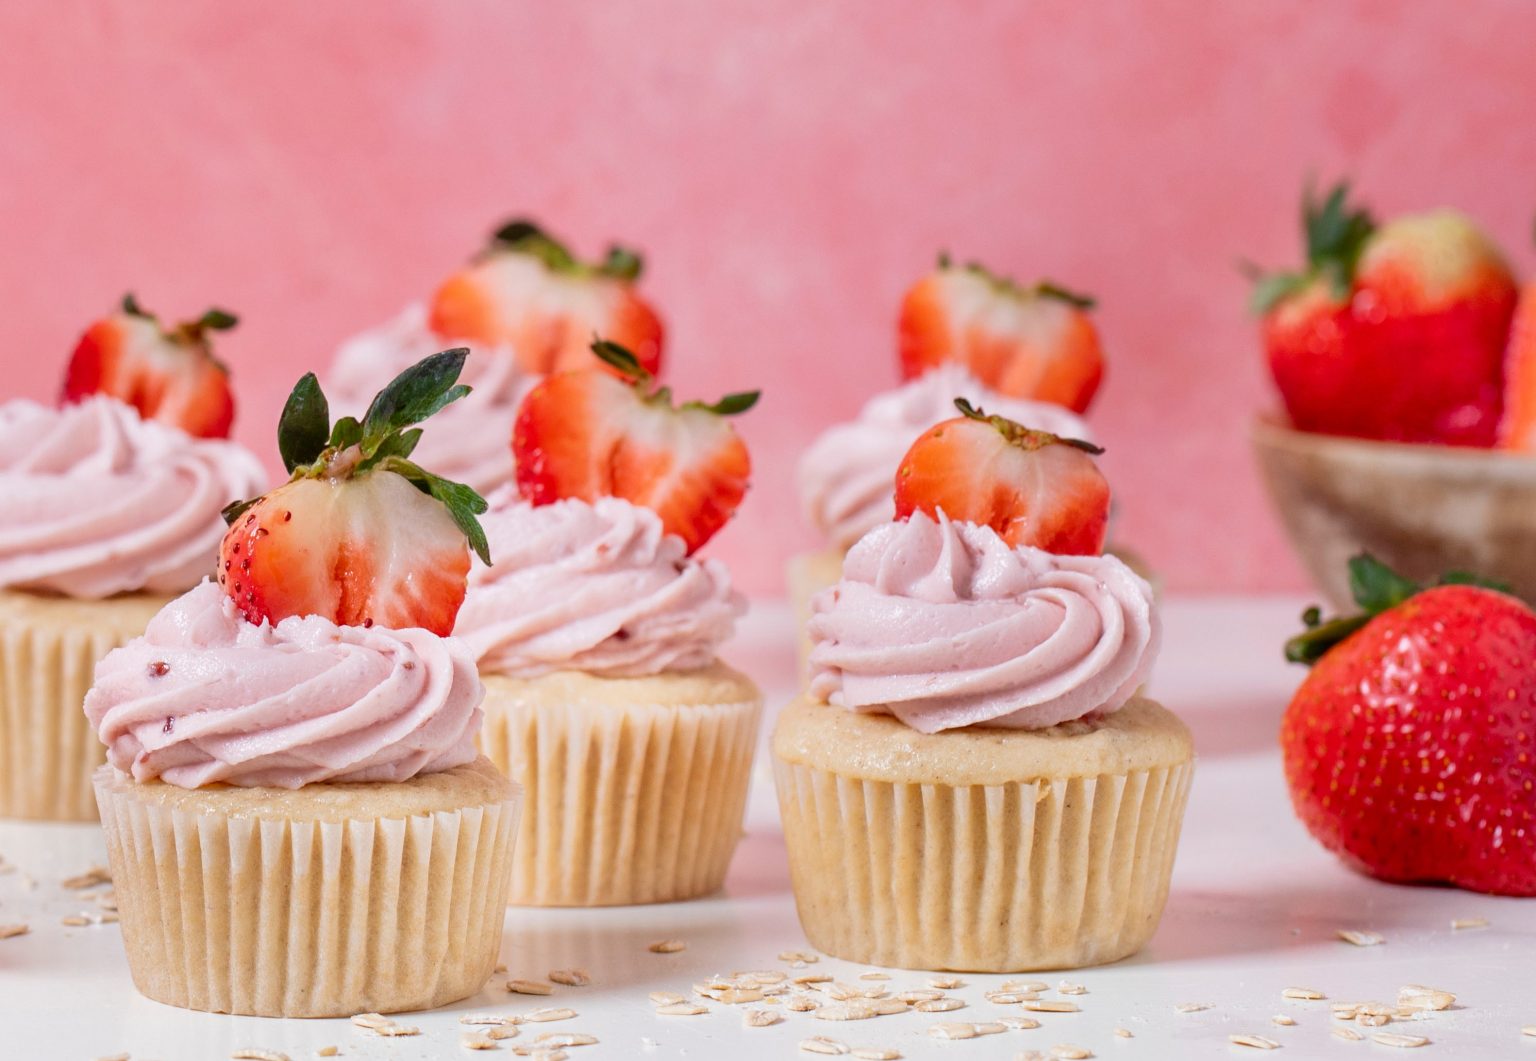 Vegan Oat Cupcakes with Strawberry Buttercream